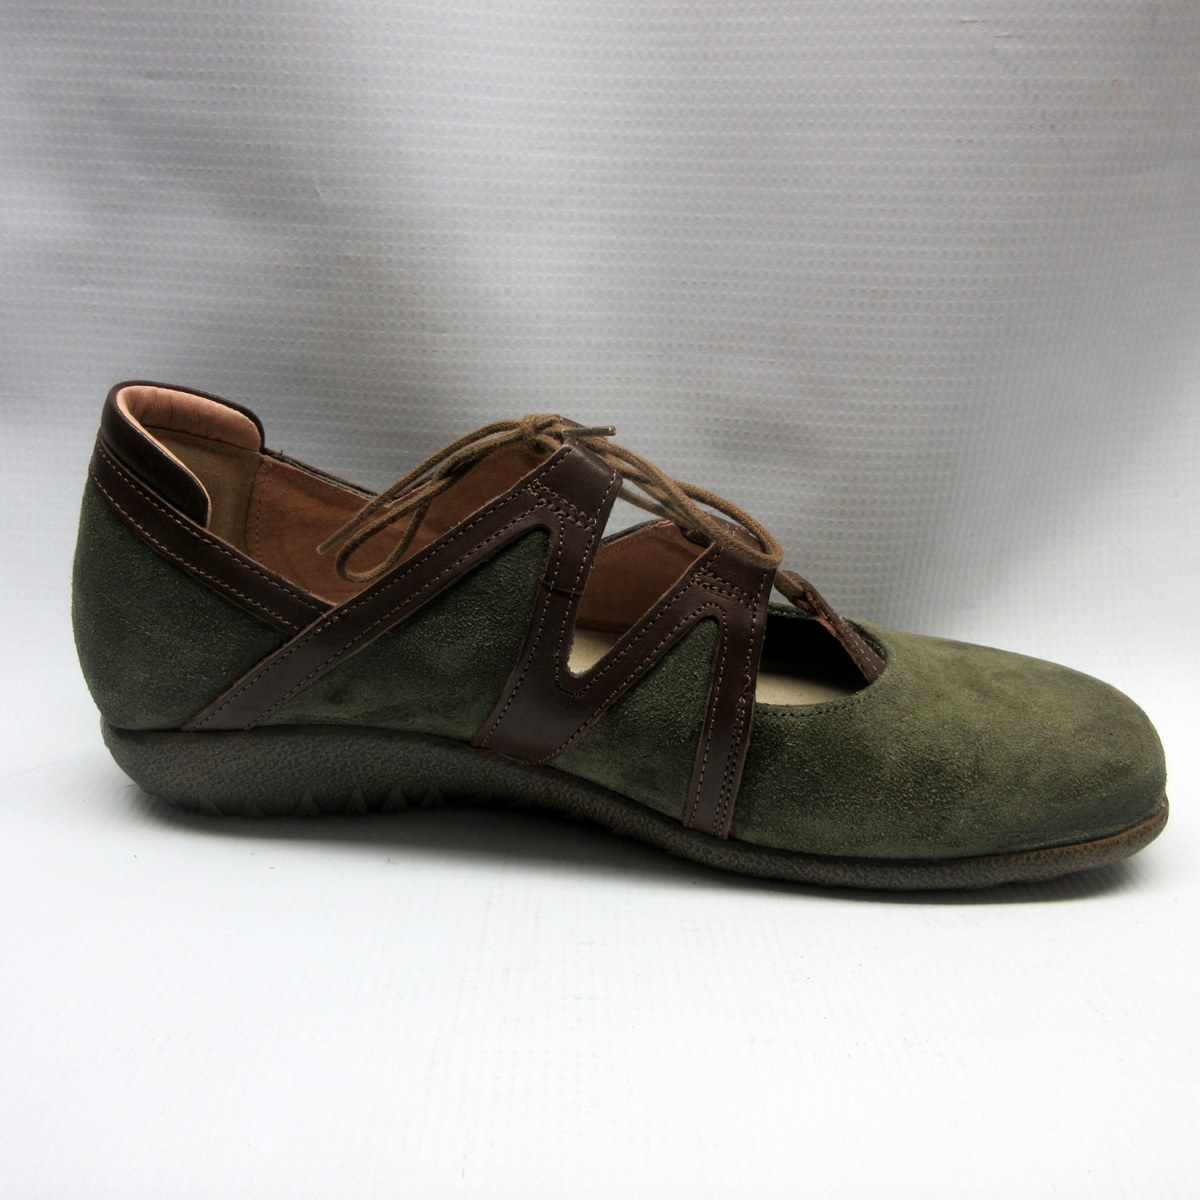 women's naot shoes on sale